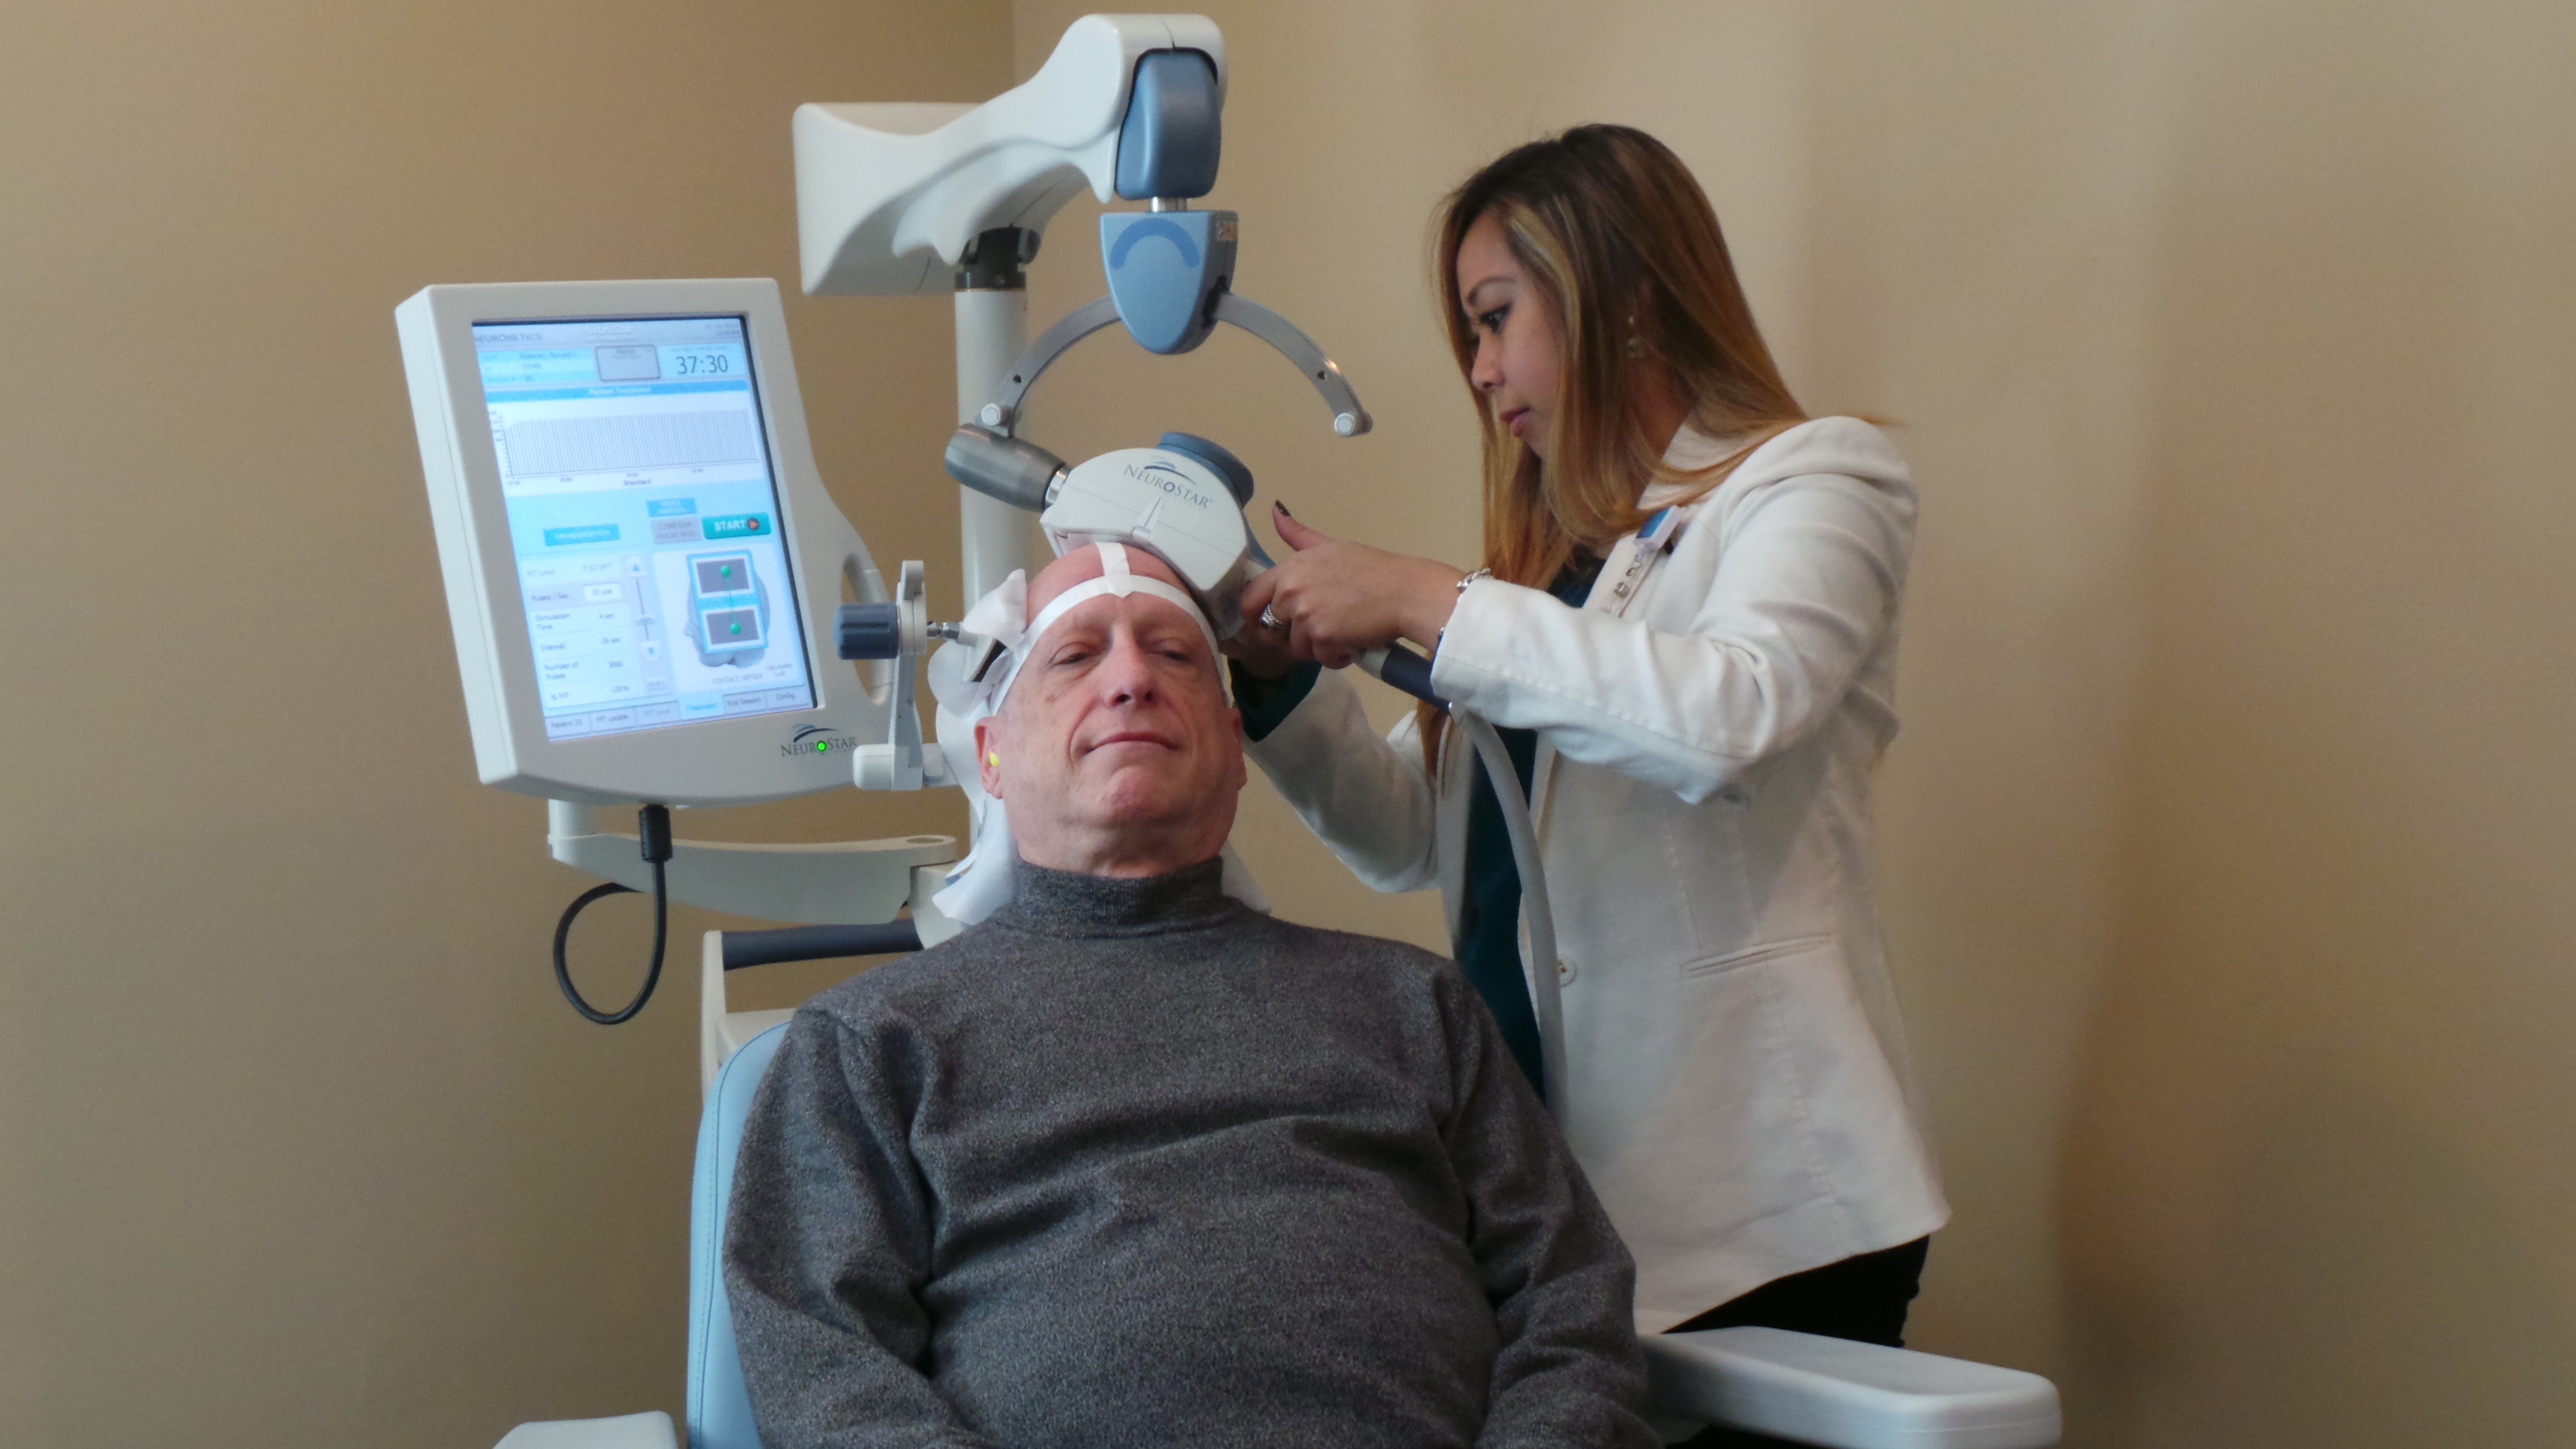 Baptist Health Provides Brain Stimulation Therapy to Help with Depression